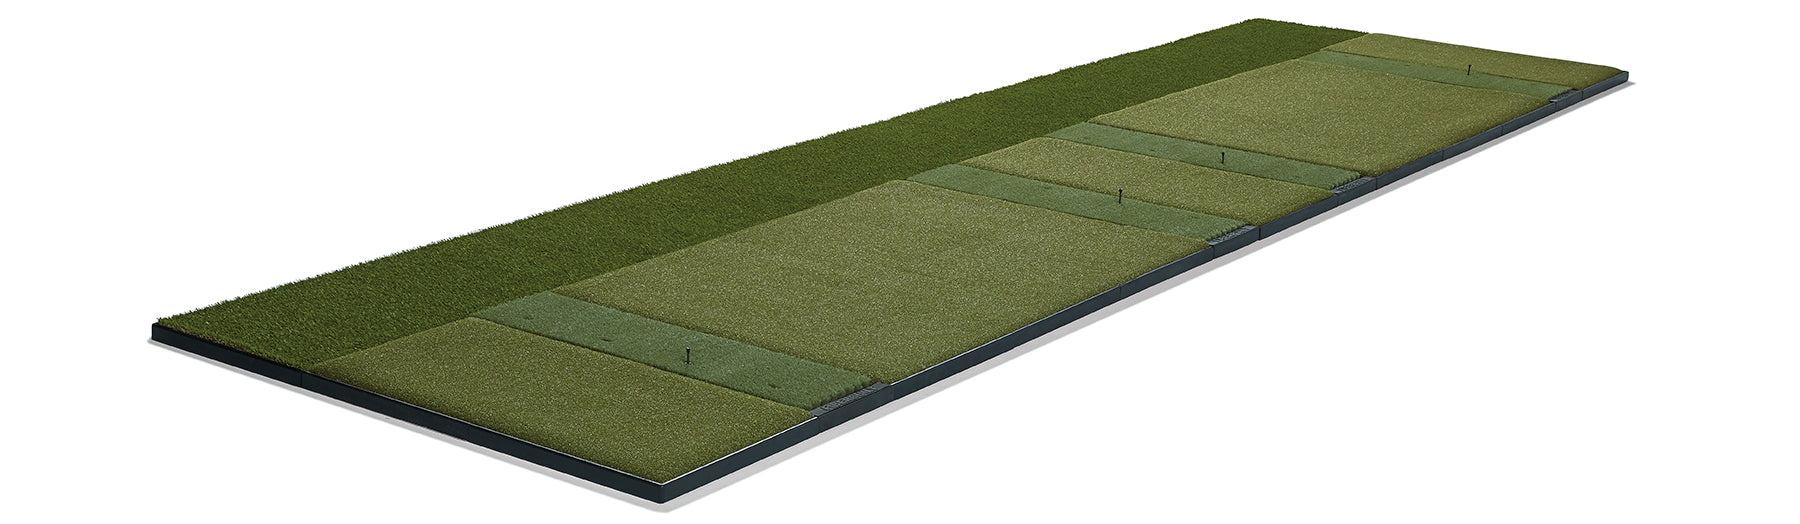 Why a Rubber Base System Makes All the Difference for Golf Mats